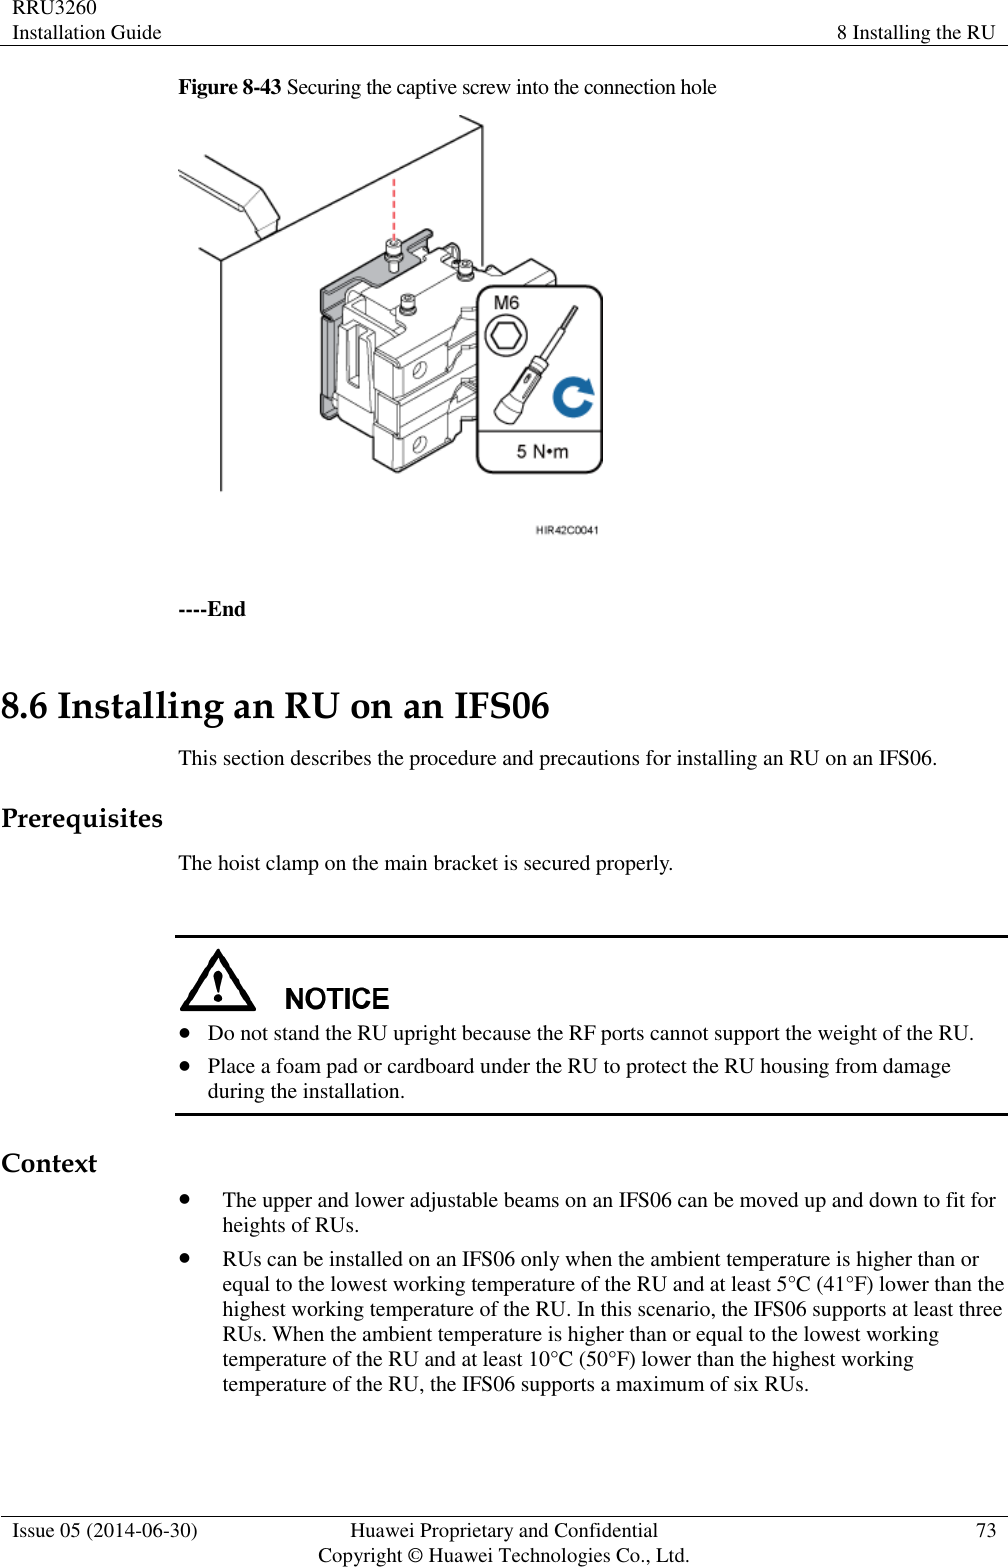 RRU3260 Installation Guide 8 Installing the RU  Issue 05 (2014-06-30) Huawei Proprietary and Confidential                                     Copyright © Huawei Technologies Co., Ltd. 73  Figure 8-43 Securing the captive screw into the connection hole   ----End 8.6 Installing an RU on an IFS06 This section describes the procedure and precautions for installing an RU on an IFS06. Prerequisites The hoist clamp on the main bracket is secured properly.    Do not stand the RU upright because the RF ports cannot support the weight of the RU.  Place a foam pad or cardboard under the RU to protect the RU housing from damage during the installation. Context  The upper and lower adjustable beams on an IFS06 can be moved up and down to fit for heights of RUs.  RUs can be installed on an IFS06 only when the ambient temperature is higher than or equal to the lowest working temperature of the RU and at least 5°C (41°F) lower than the highest working temperature of the RU. In this scenario, the IFS06 supports at least three RUs. When the ambient temperature is higher than or equal to the lowest working temperature of the RU and at least 10°C (50°F) lower than the highest working temperature of the RU, the IFS06 supports a maximum of six RUs. 